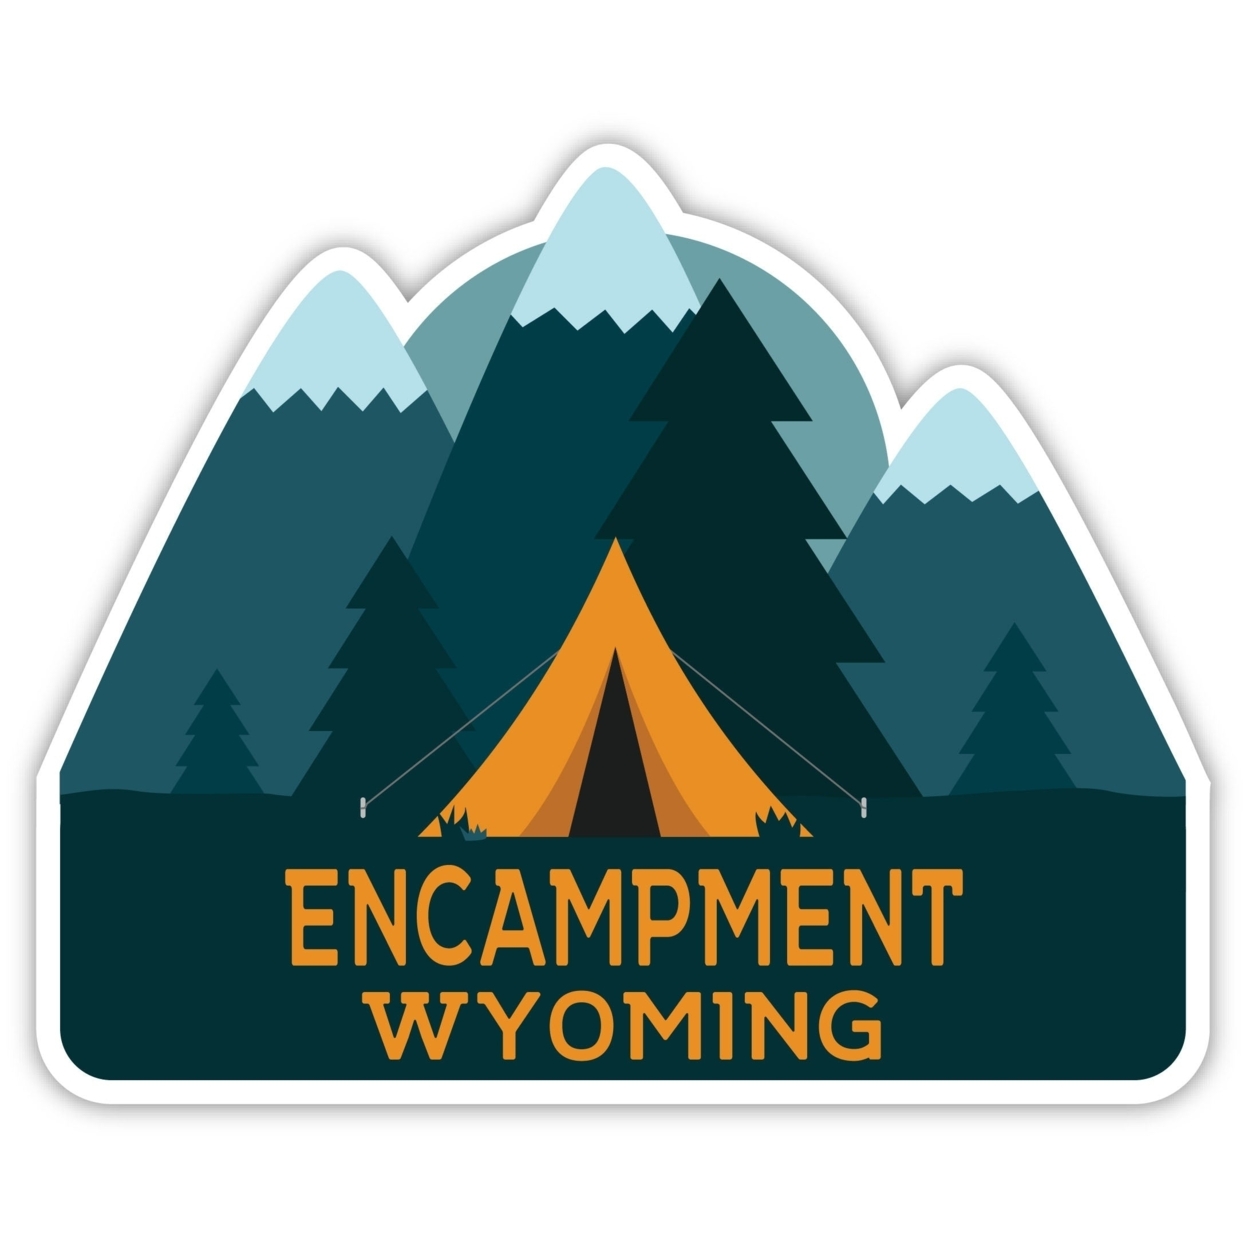 Encampment Wyoming Souvenir Decorative Stickers (Choose Theme And Size) - 4-Pack, 4-Inch, Bear